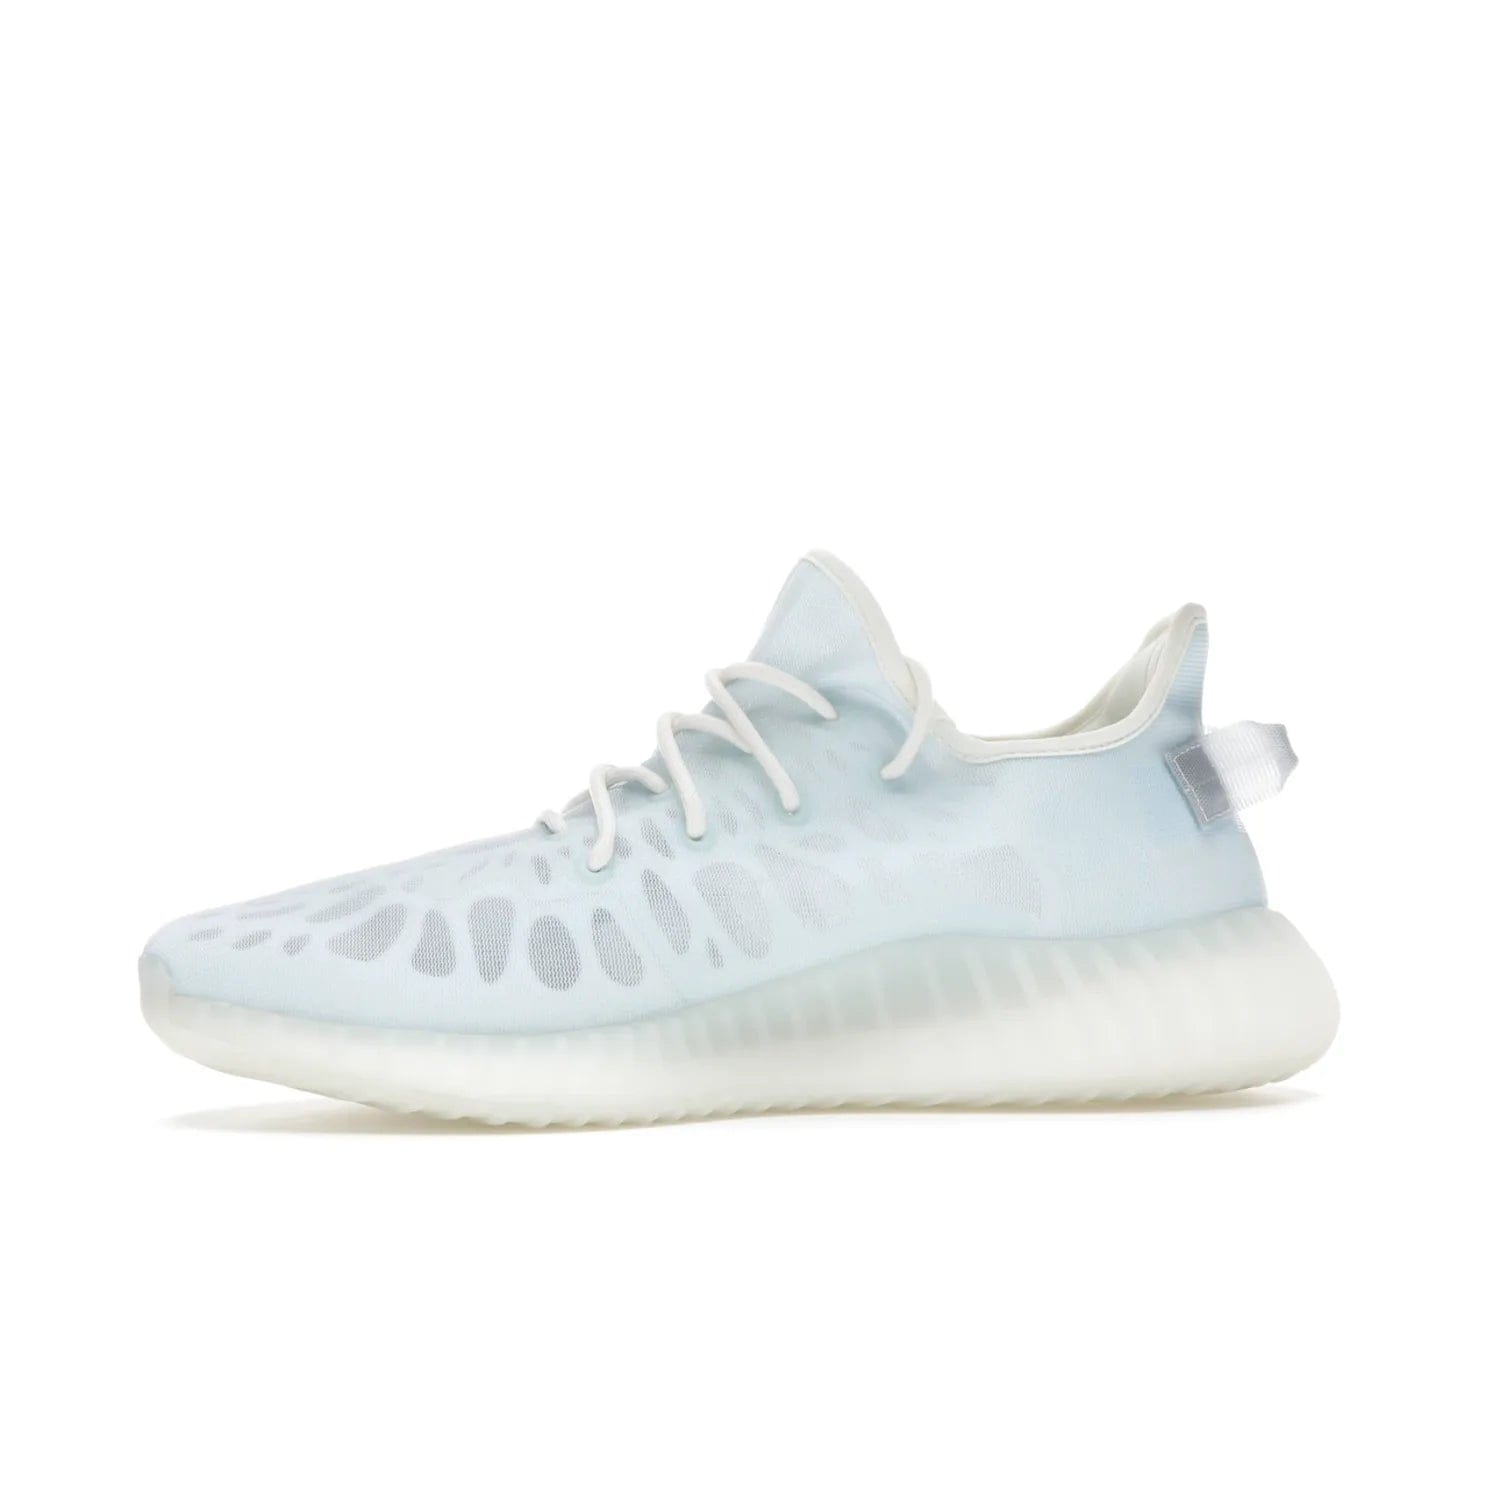 adidas Yeezy Boost 350 V2 Mono Ice - Image 18 - Only at www.BallersClubKickz.com - Introducing the adidas Yeezy 350 V2 Mono Ice - a sleek monofilament mesh design in Ice blue with Boost sole and heel pull tab. Released exclusively in the US for $220.